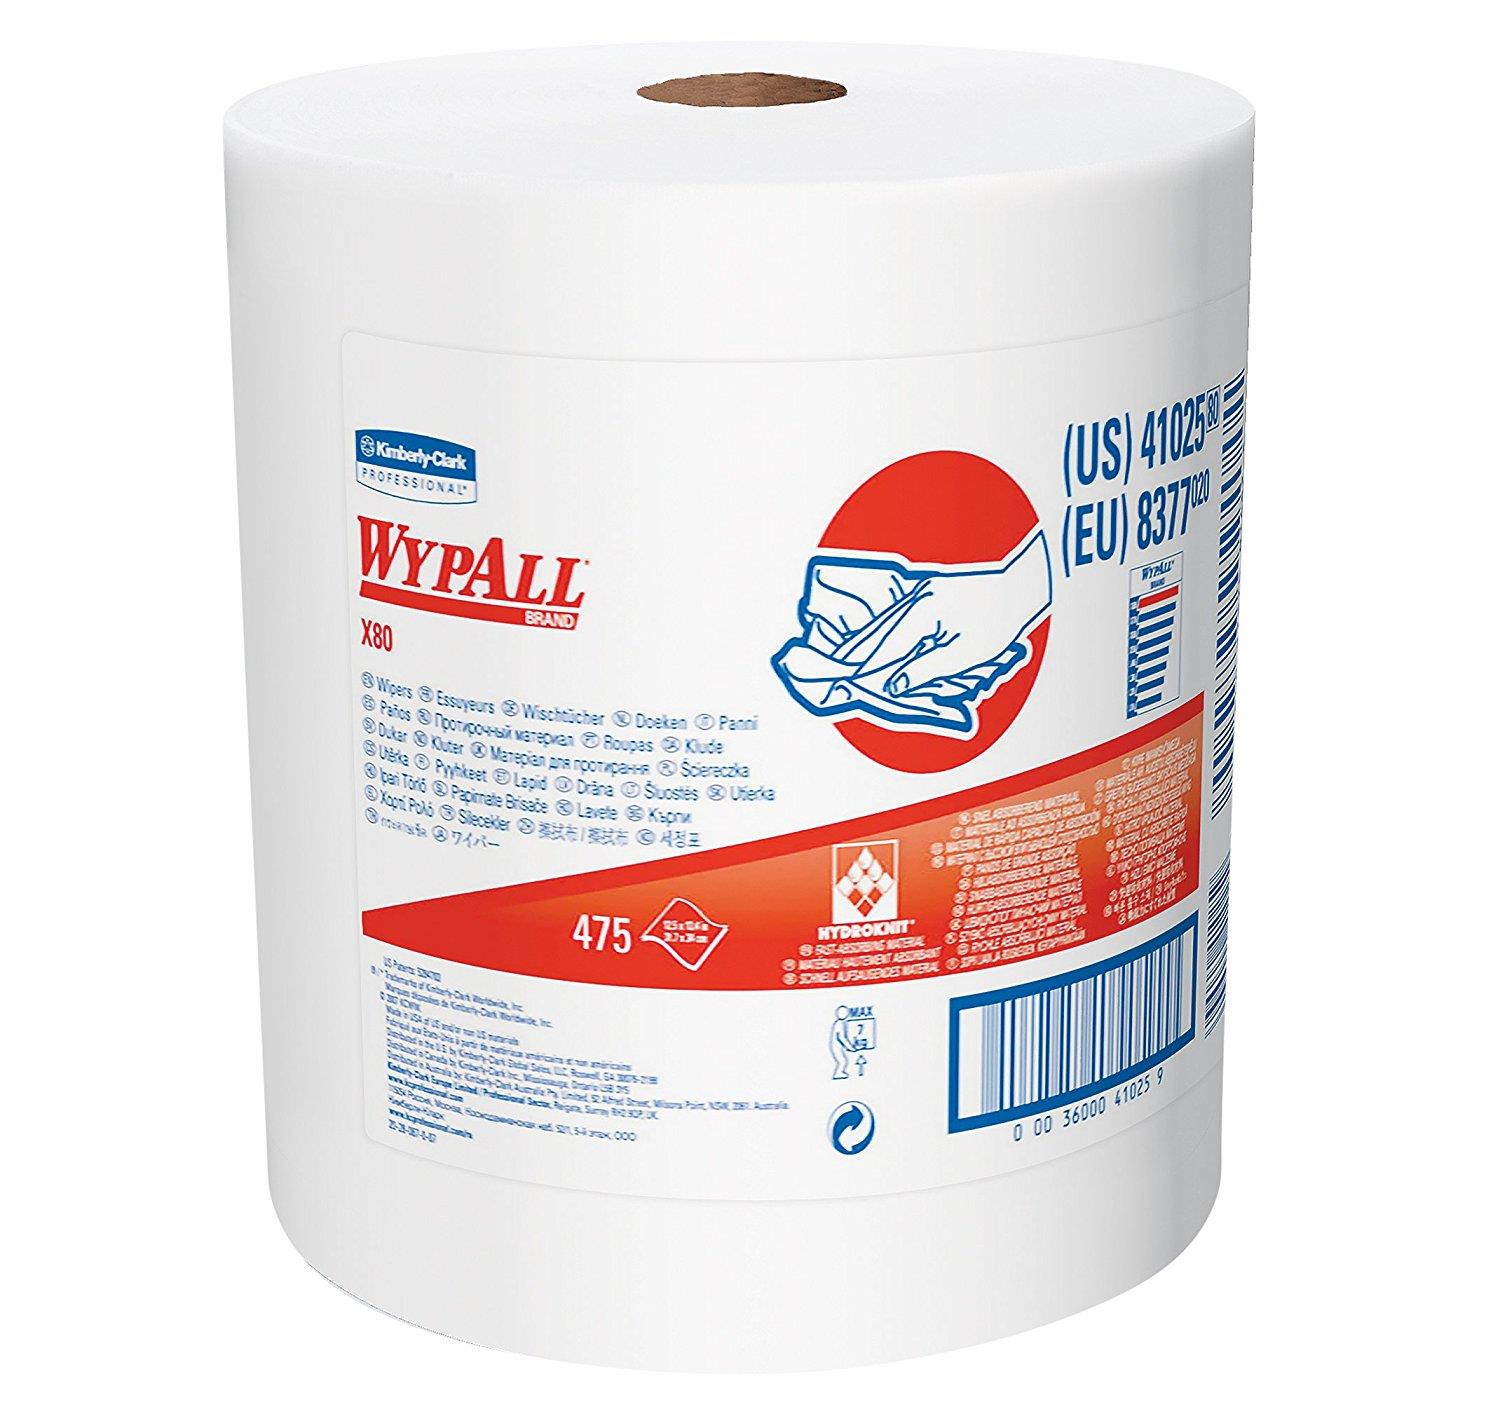 WYPALL X80 JUMBO ROLL WHITE 475 WIPERS